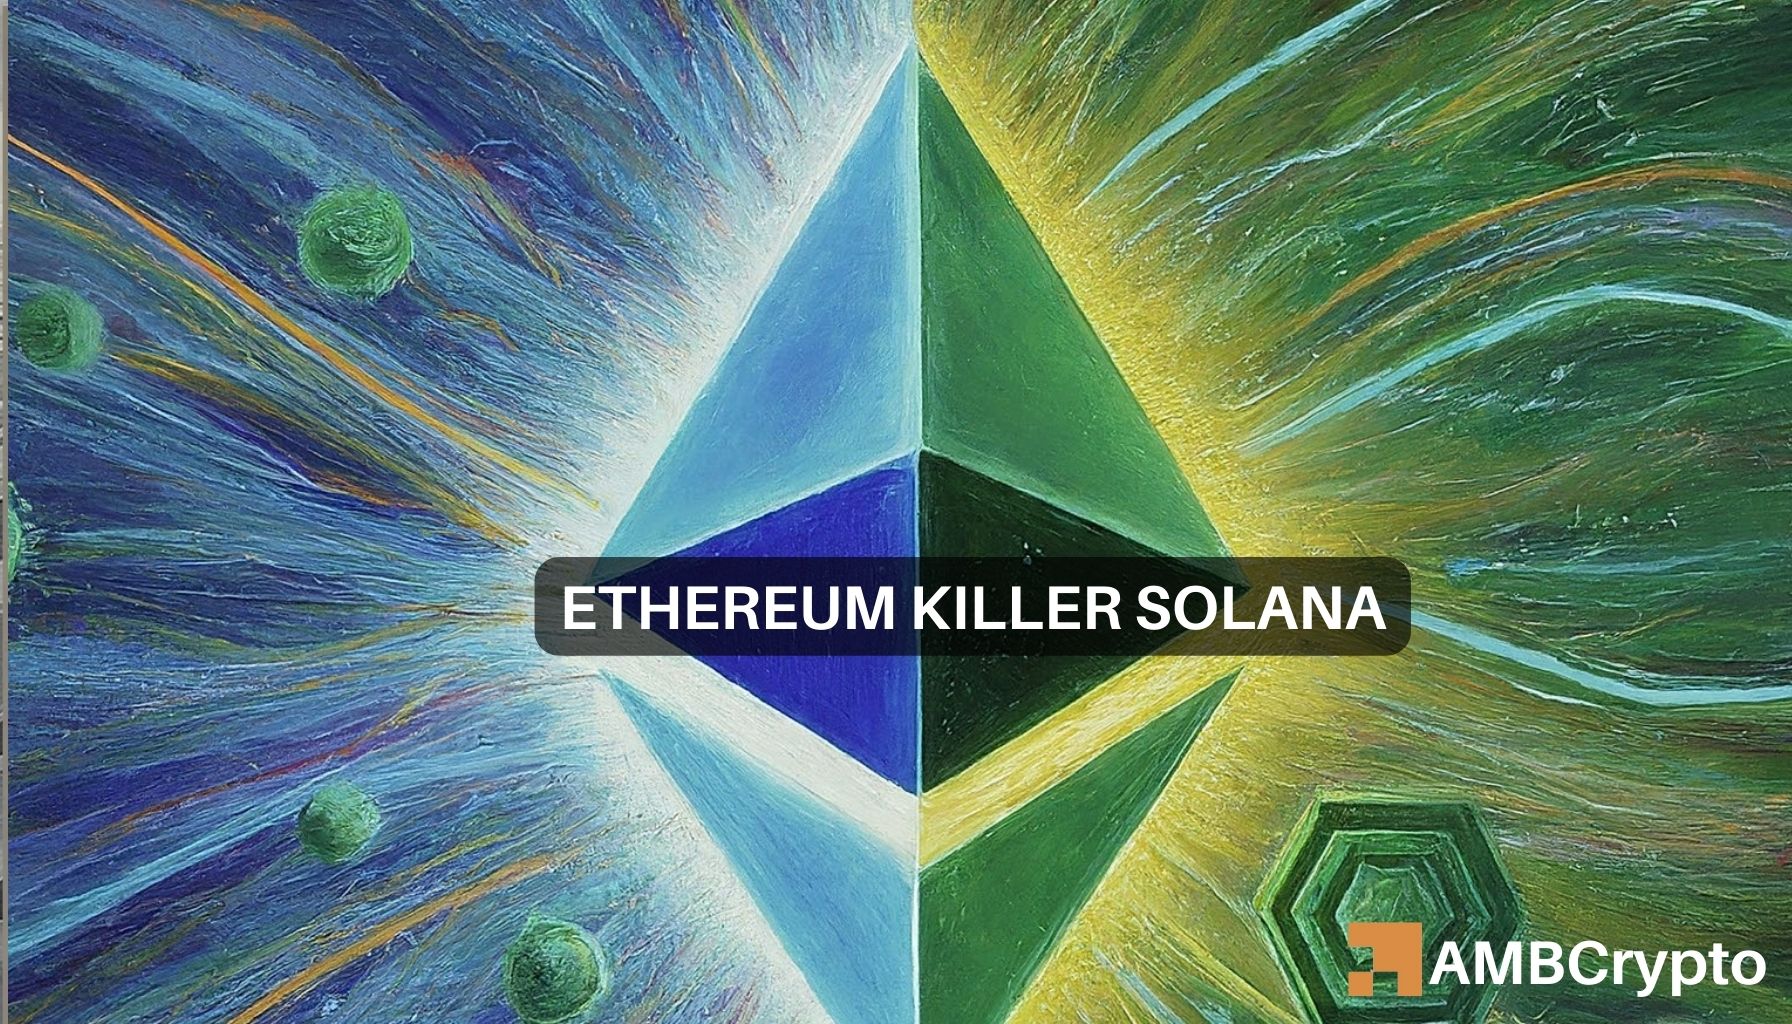 Solana saw significantly higher trading volumes on its decentralized exchanges (DEXes) compared to Ethereum.